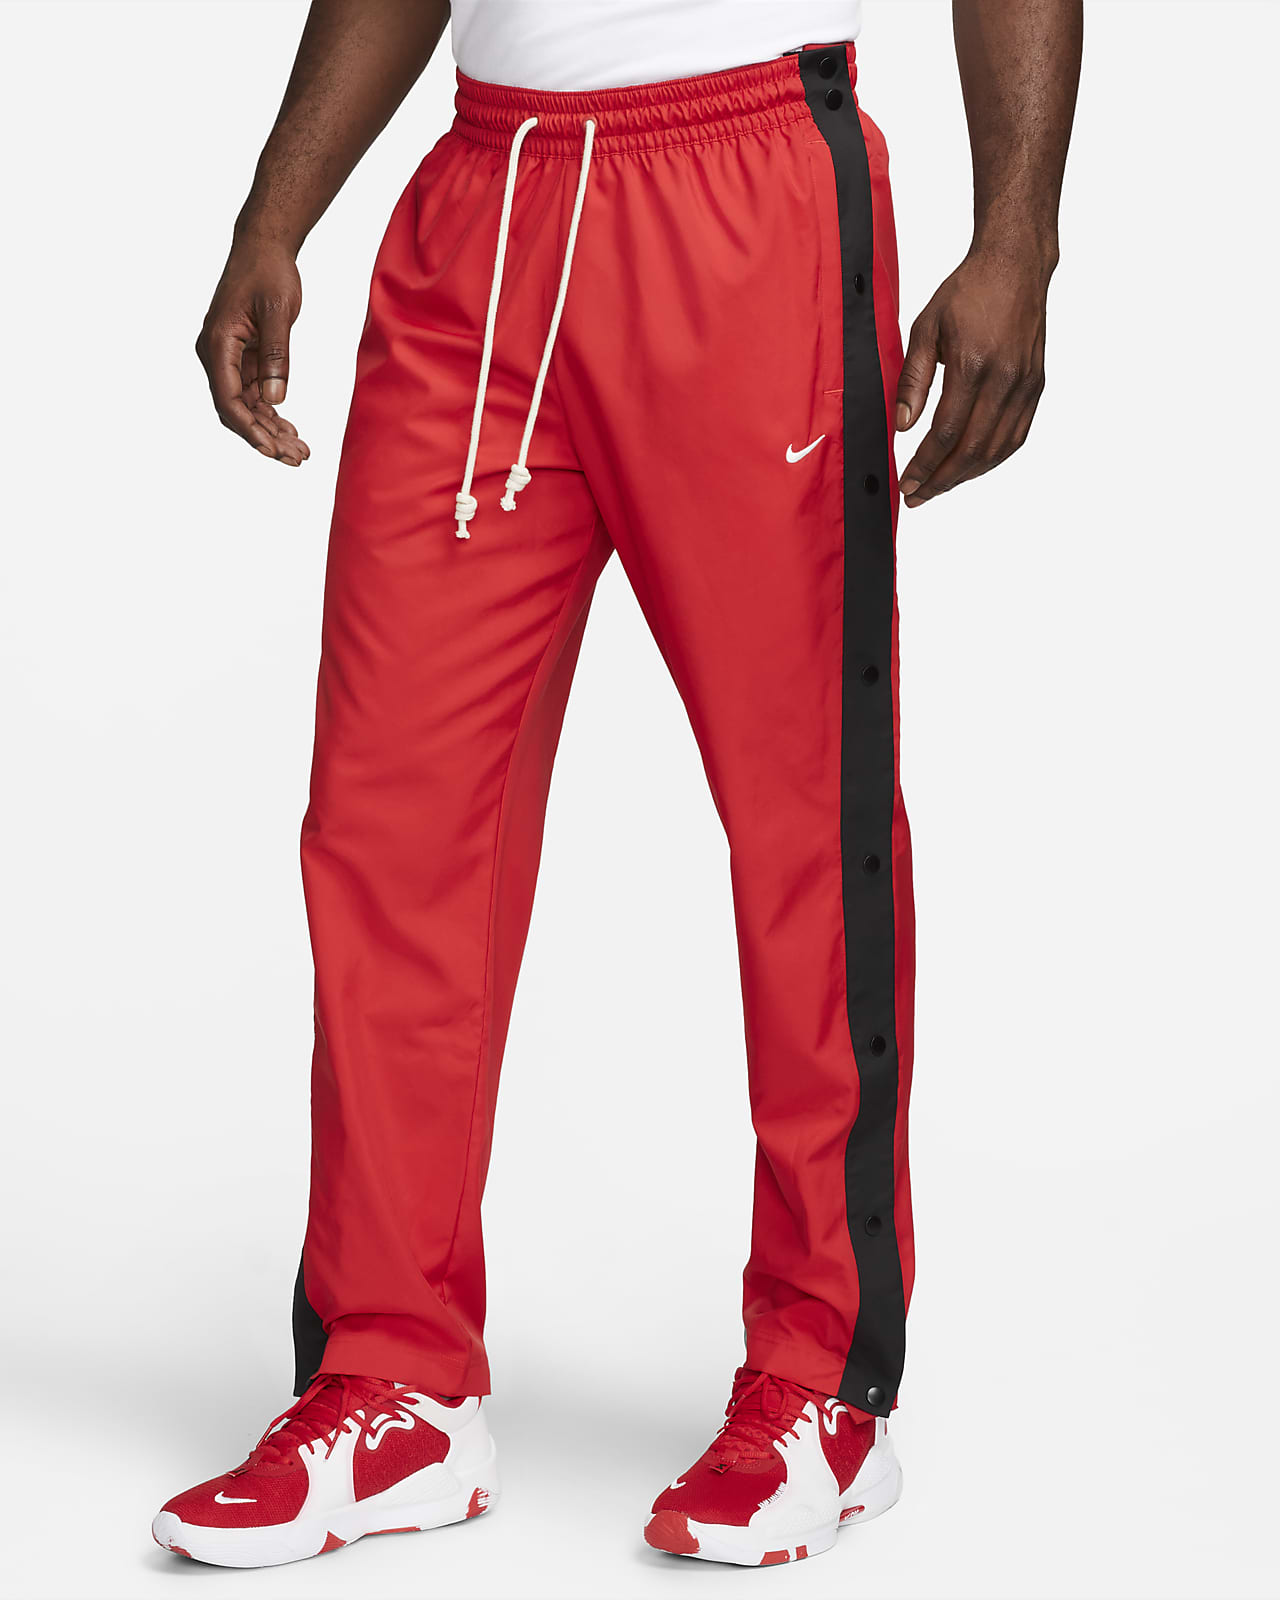 Nike DNA Men's Tearaway Basketball Trousers